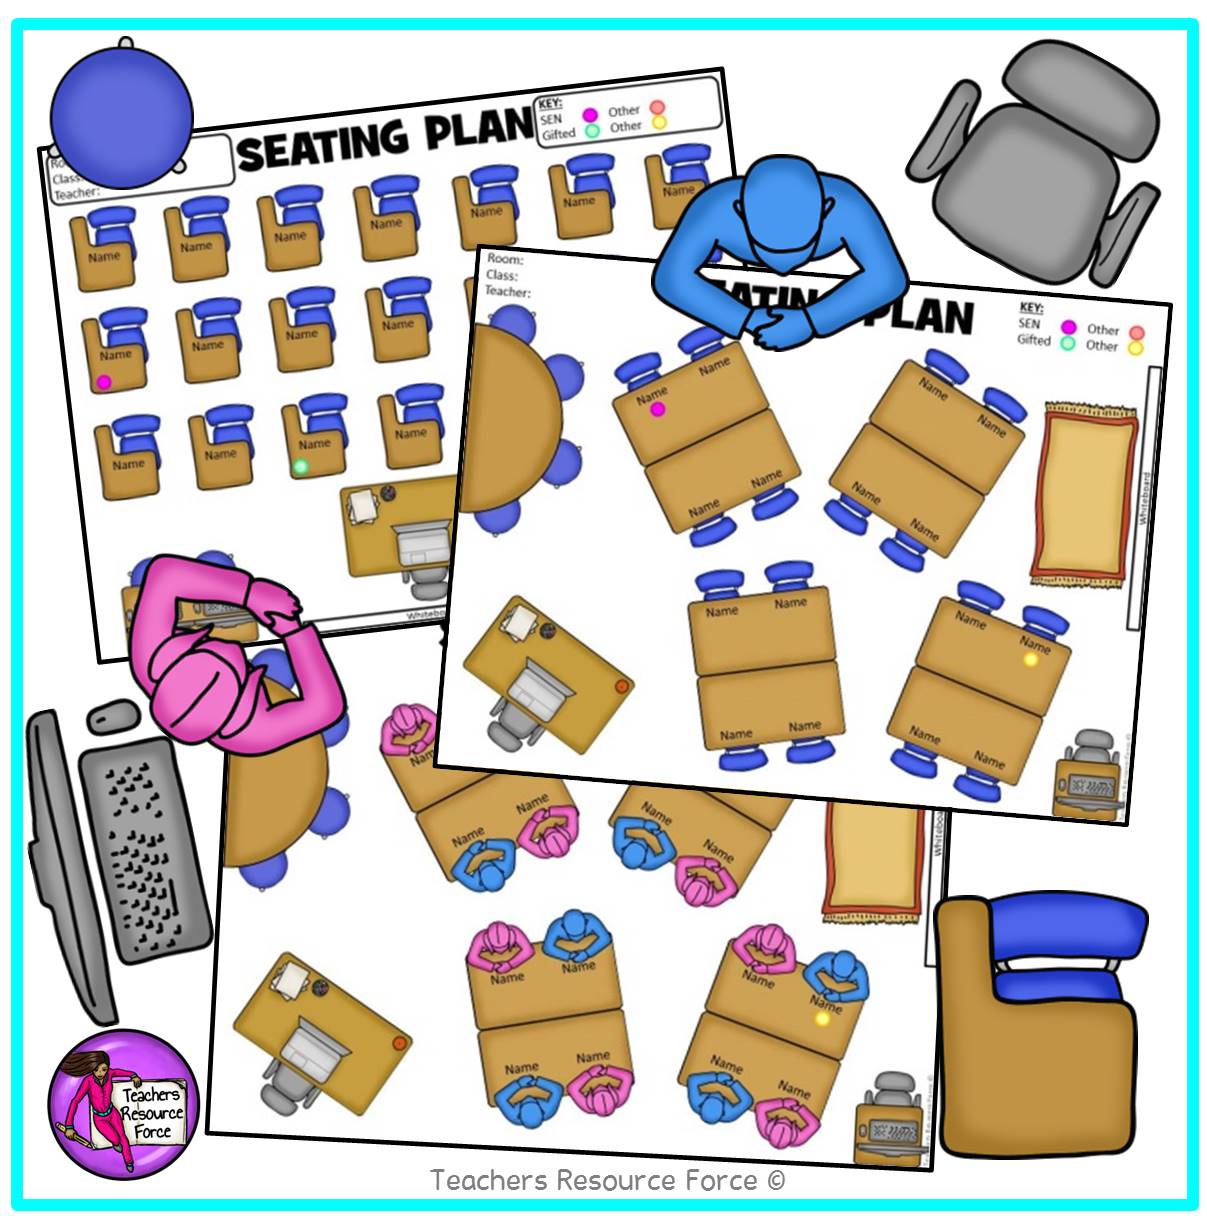 editable-classroom-seating-chart-template-plan-with-movable-images-shop-trf-one